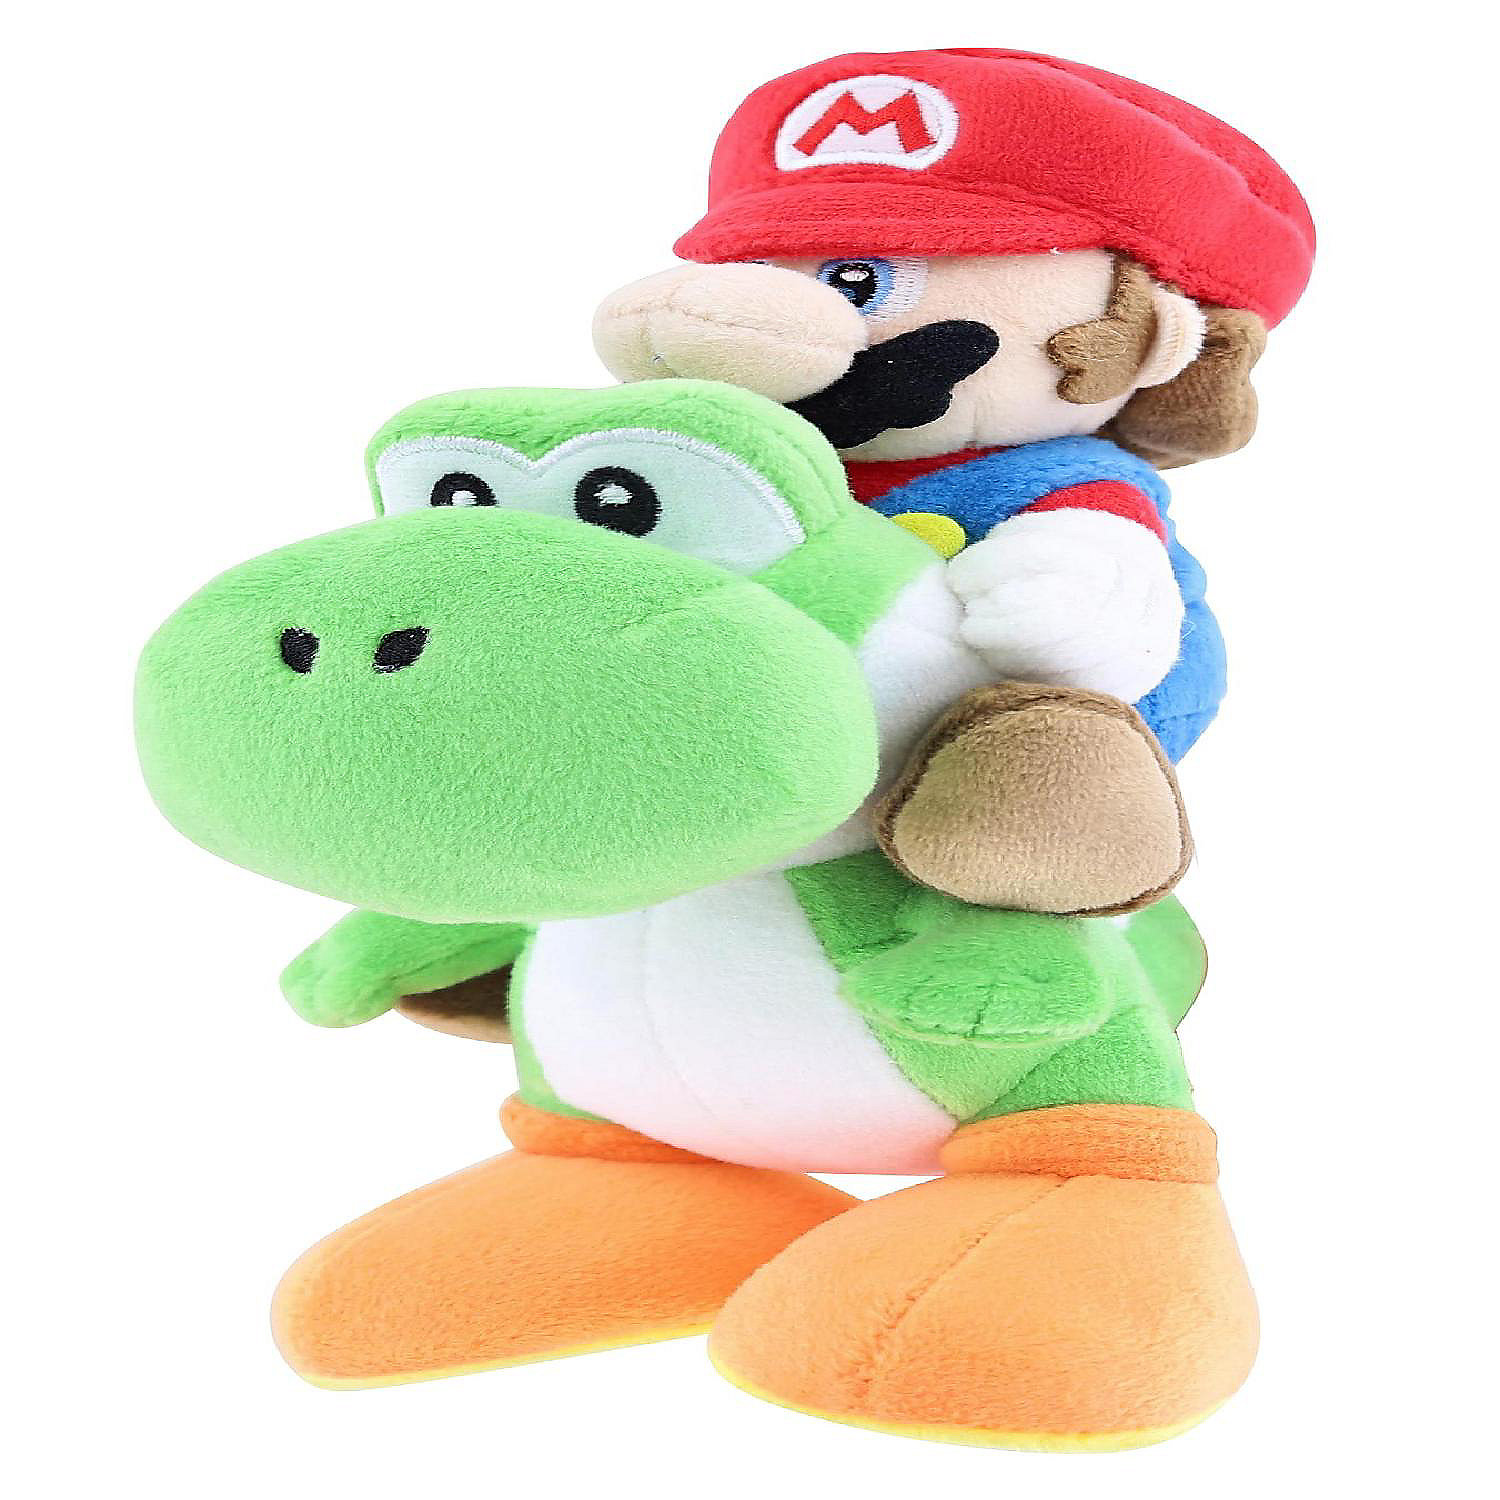 https://s7.orientaltrading.com/is/image/OrientalTrading/VIEWER_ZOOM/super-mario-all-star-collection-8-inch-plush-mario-riding-yoshi~14259114$NOWA$